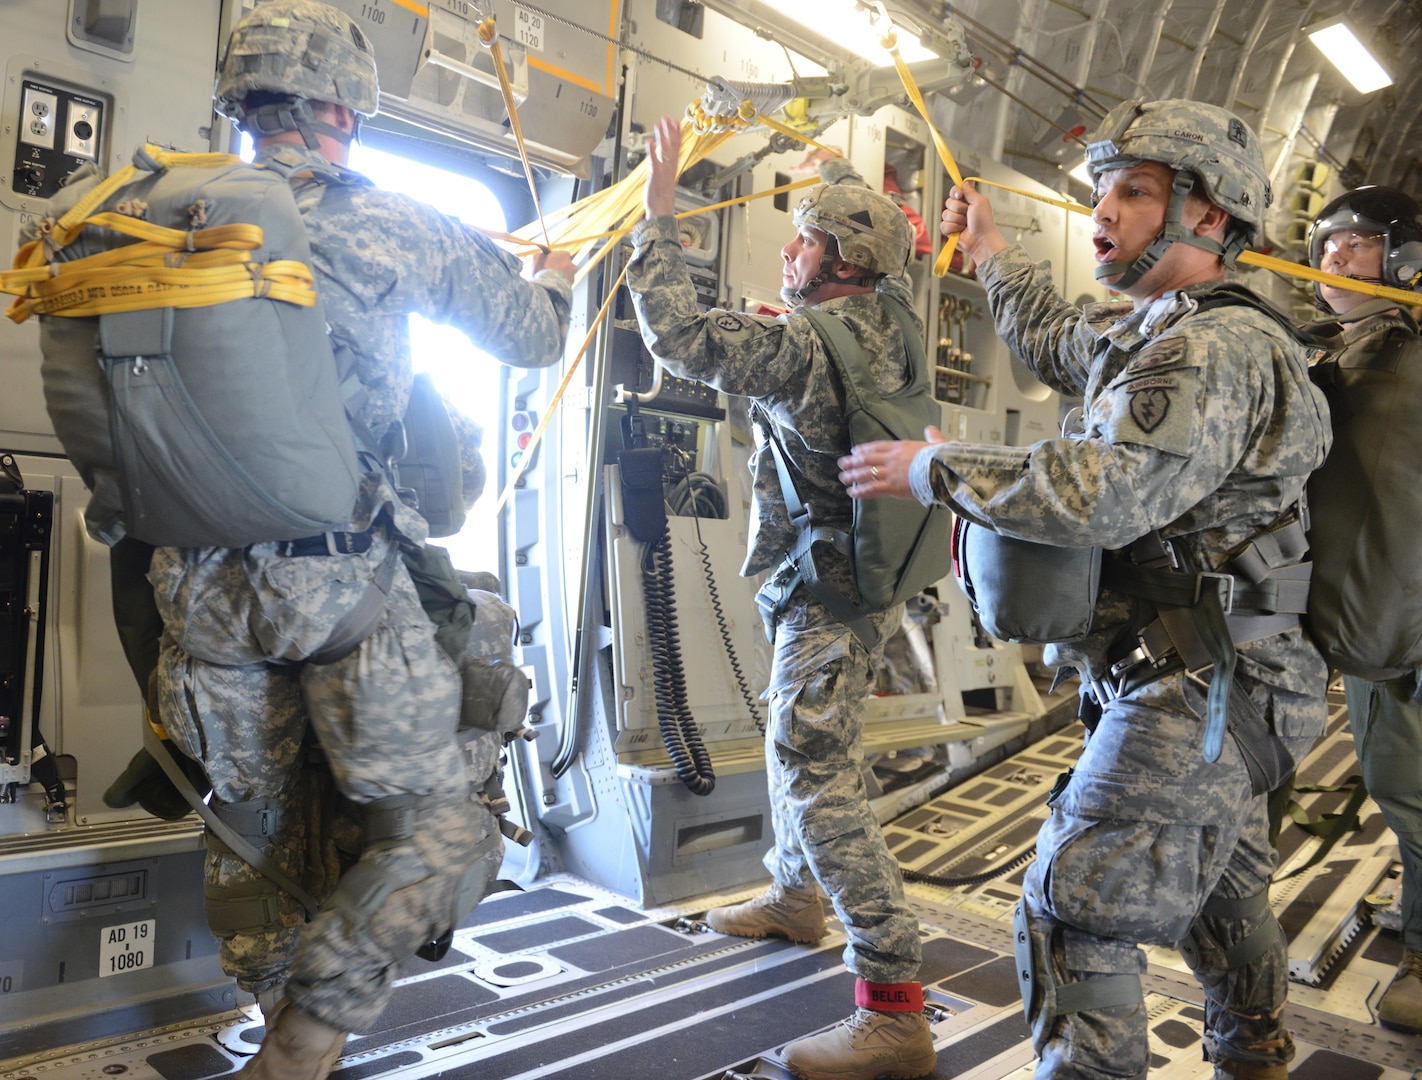 Soldiers of 3rd Battalion, 509th Parachute Infantry Regiment, 4th Infantry Brigade Combat Team (Airborne), 25th Infantry Division, jump from a Royal Australian Air Force C-17 Globemasters into Queensland, Australia, July 8, 2015, as part of exercise Talisman Sabre.